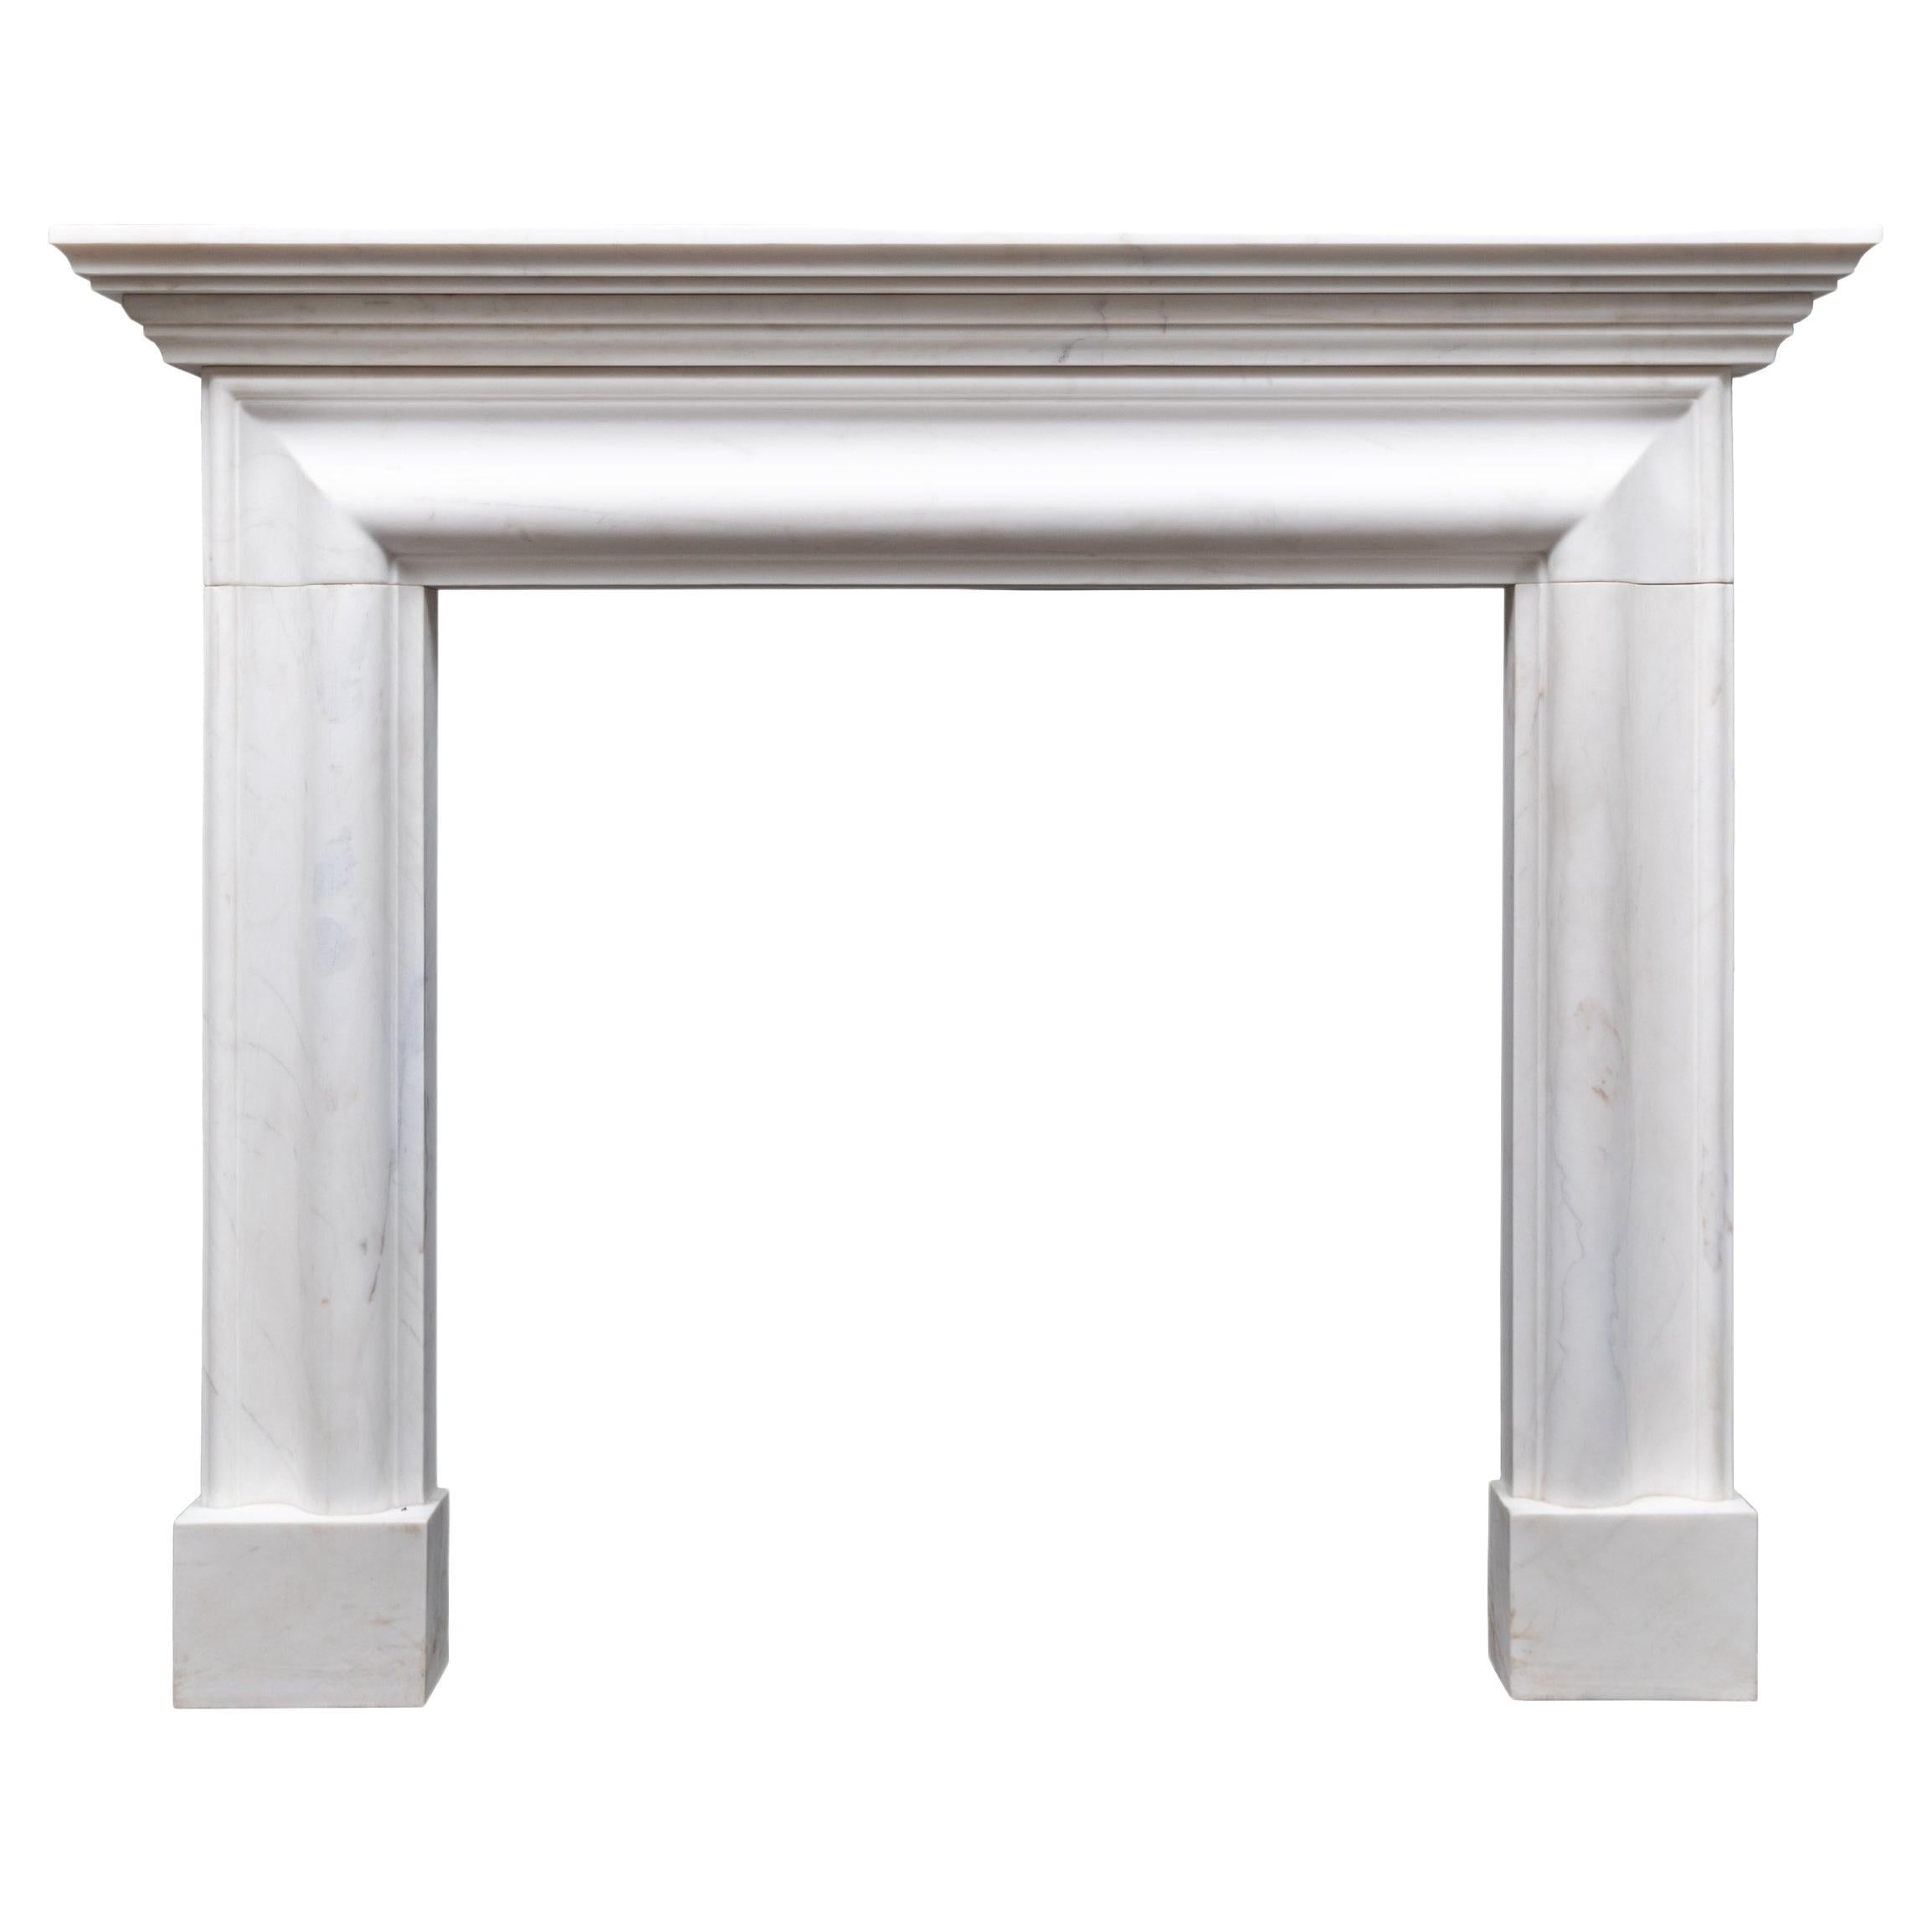 Ryan & Smith Statuary Bolection Style Marble Fireplace Mantel For Sale